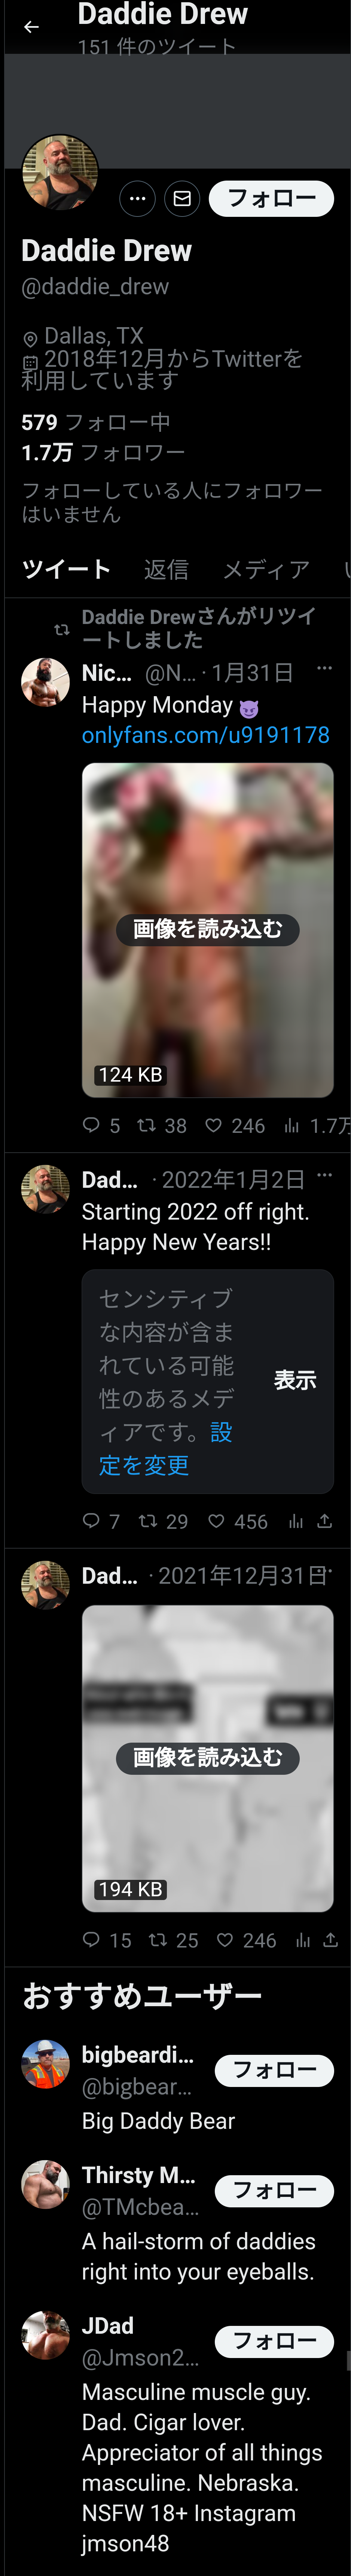 twitter-recommend-user-2.png